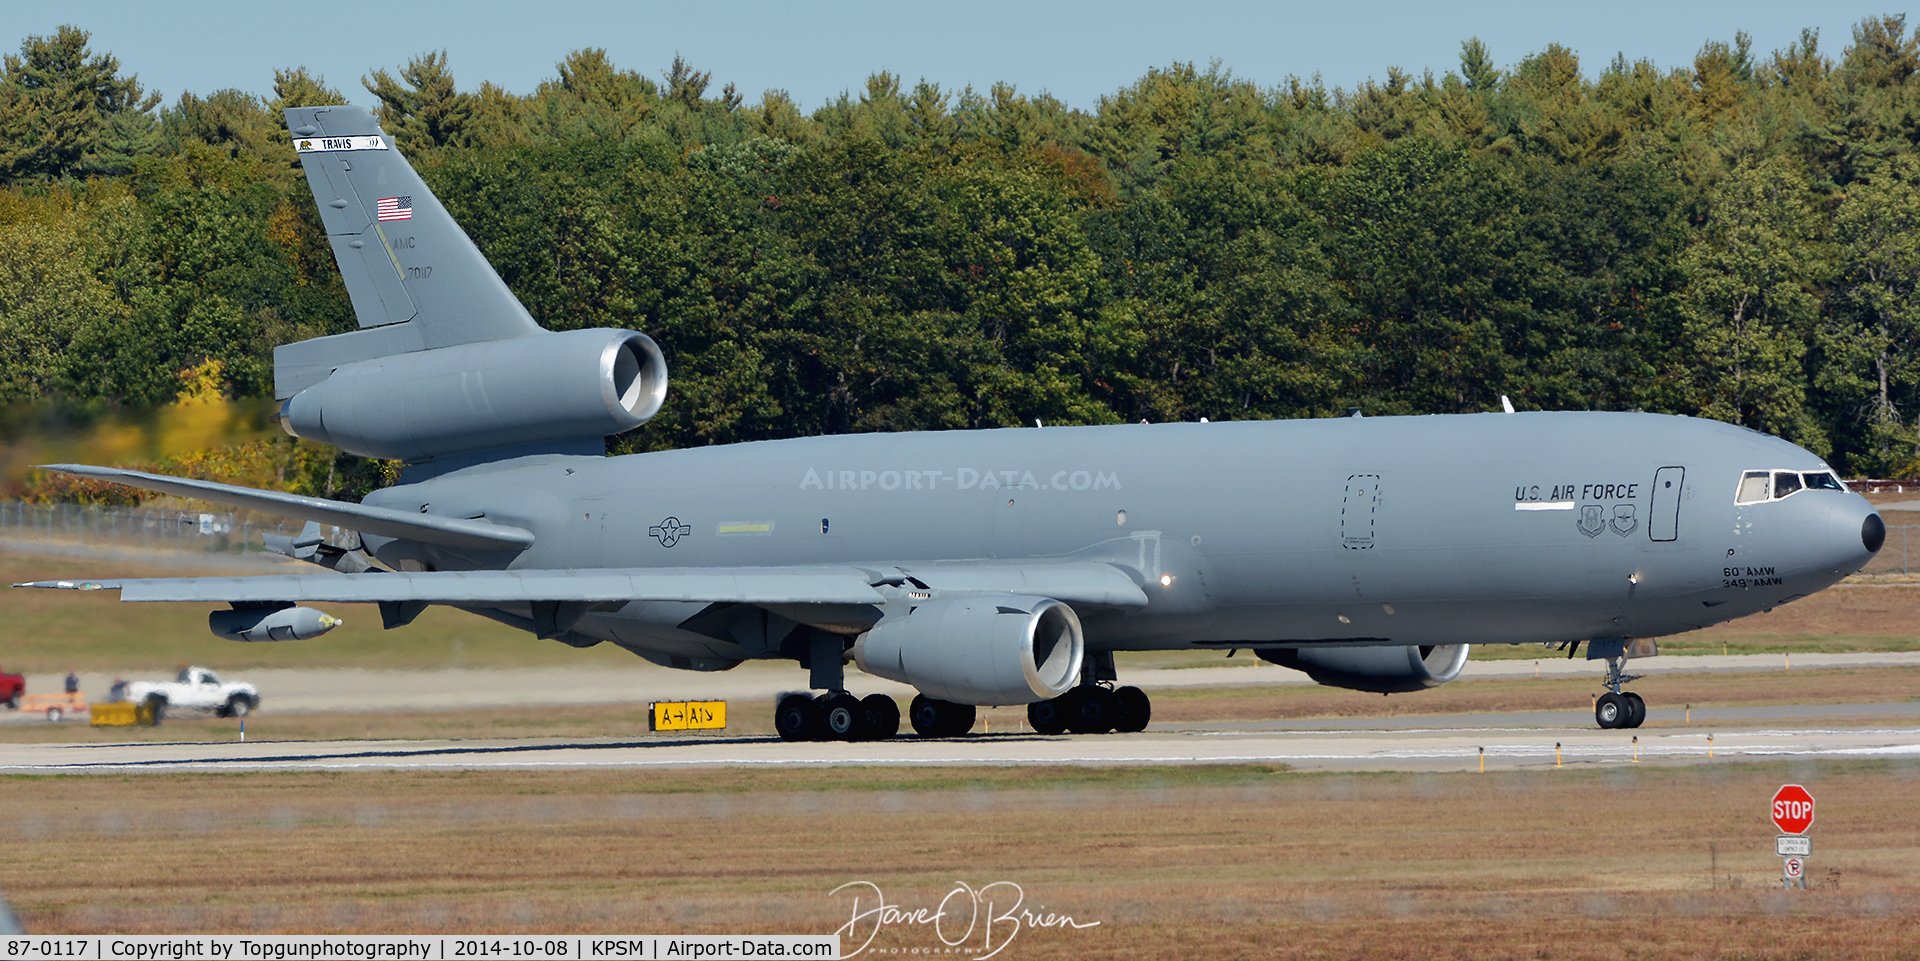 87-0117, 1987 McDonnell Douglas KC-10A Extender C/N 48303, BLUE52 taking off with 2nd group of TREND Hornets